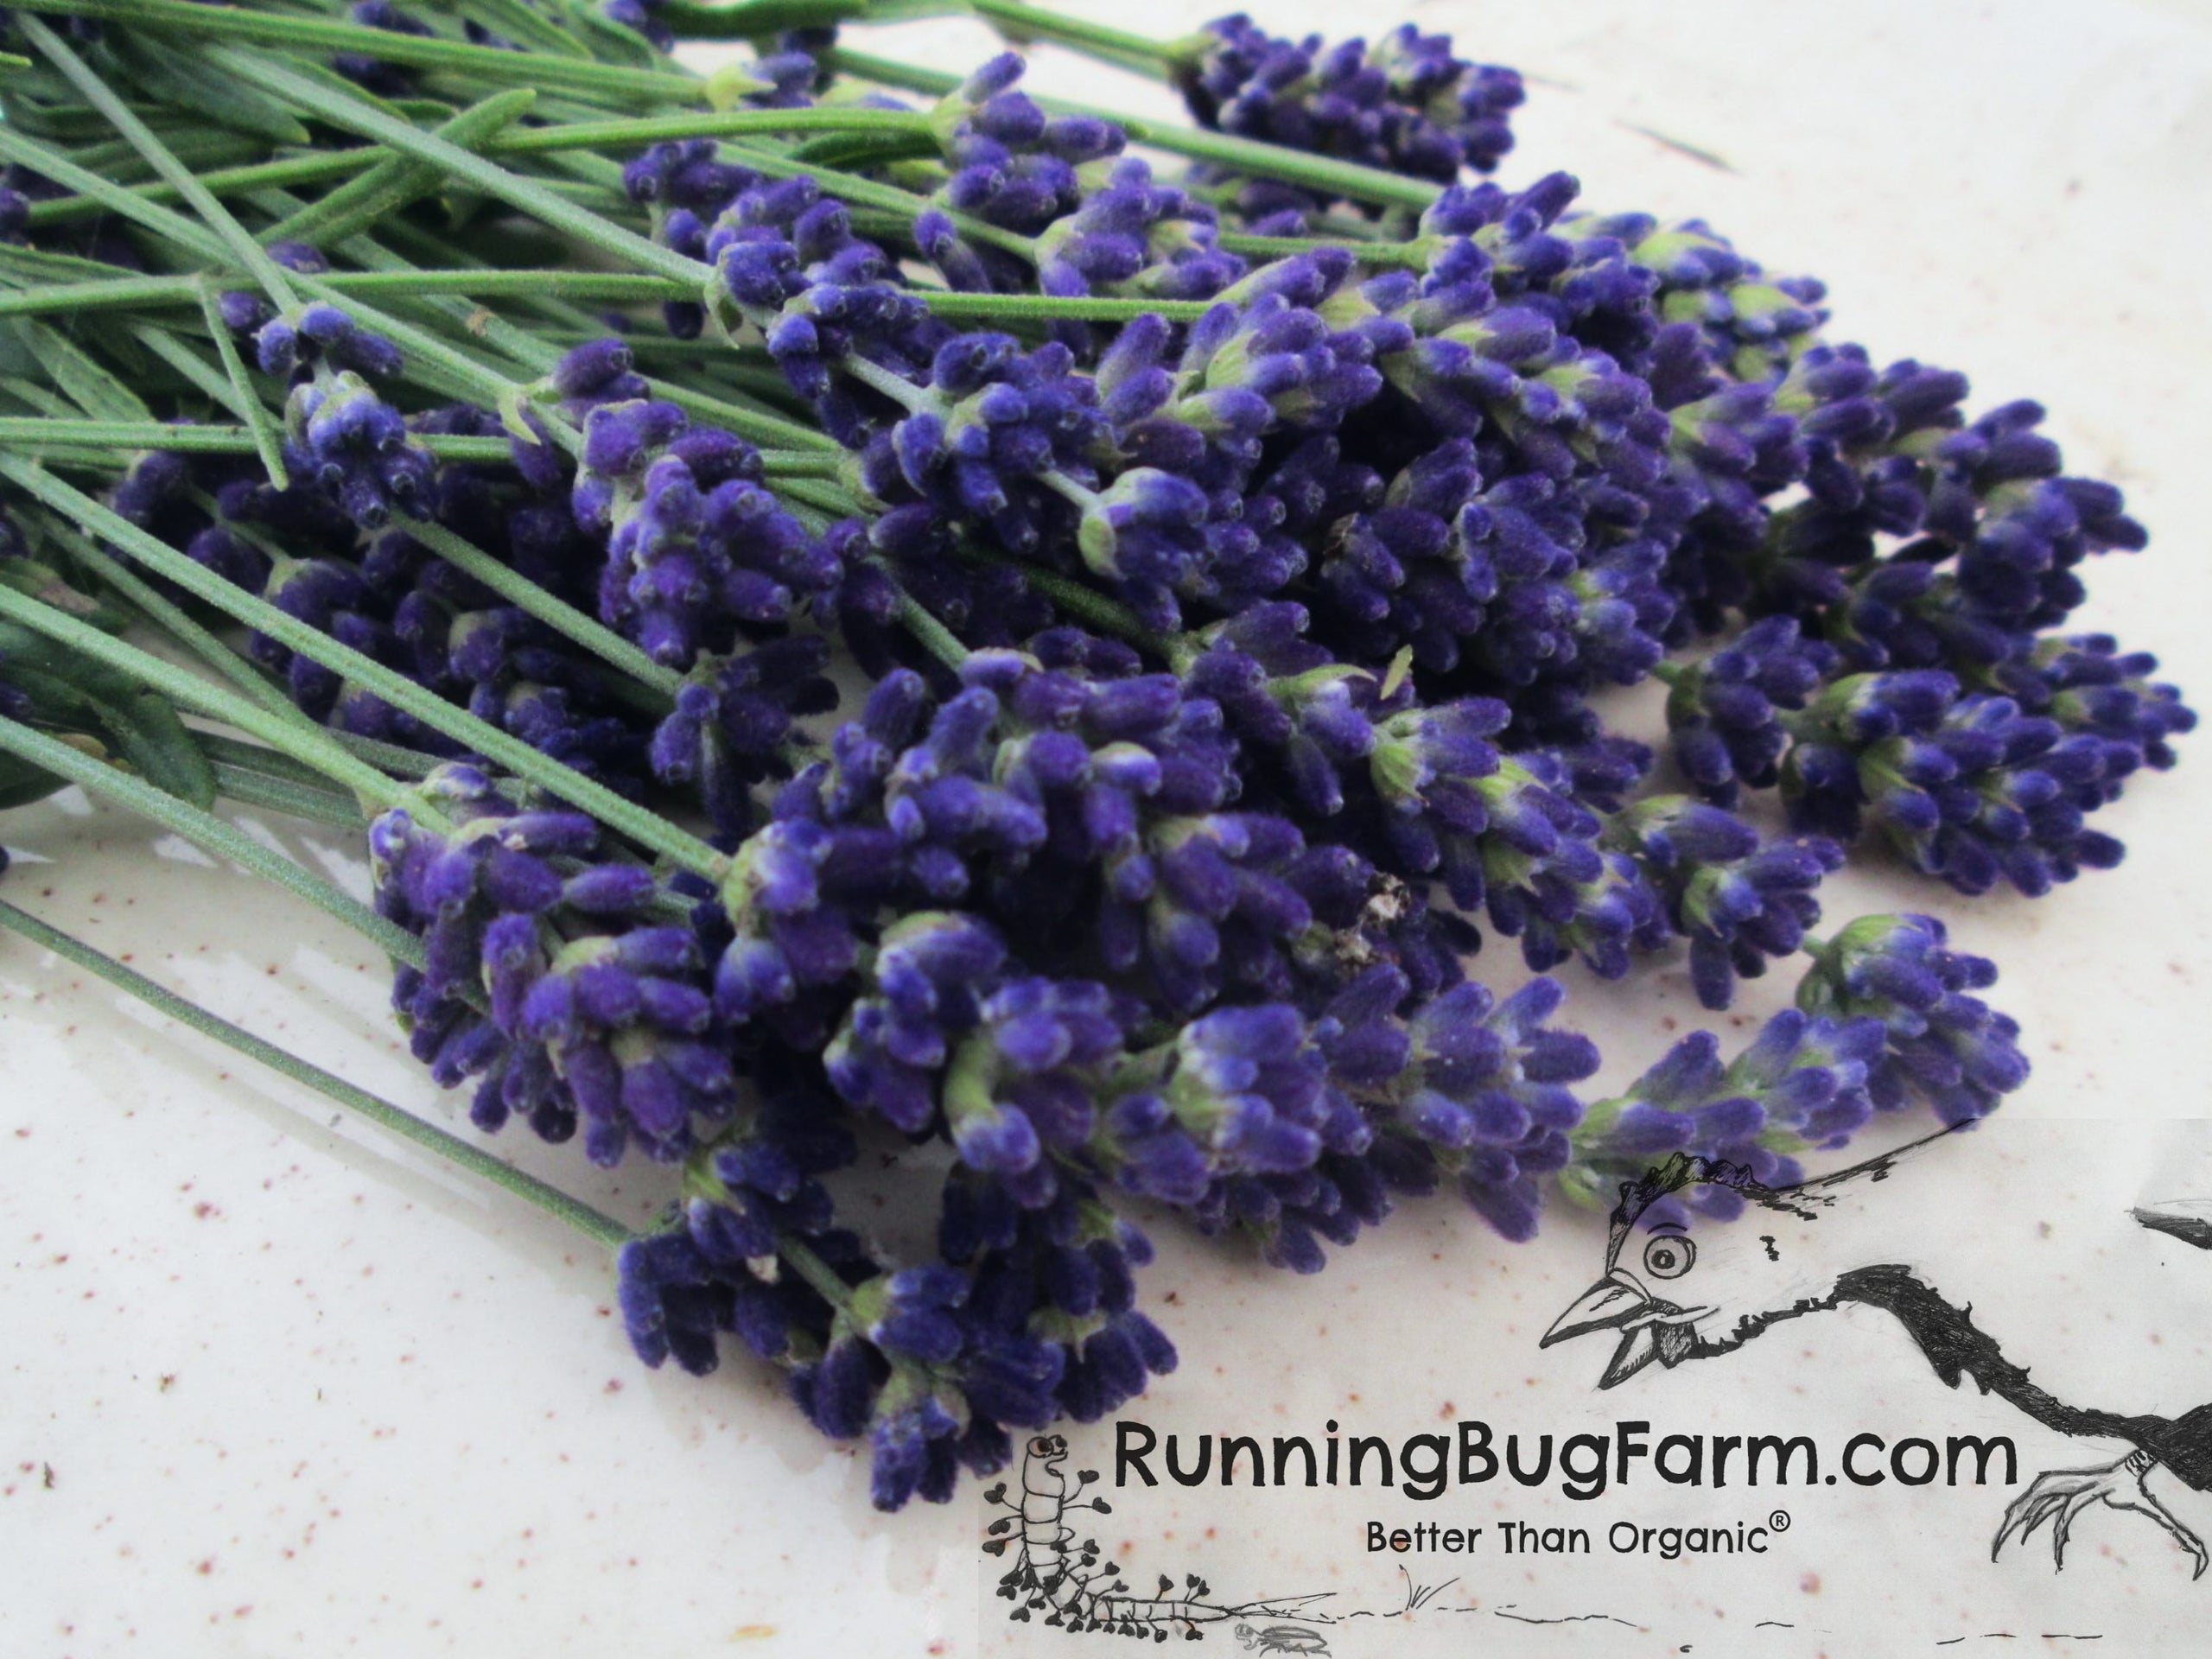 Only 45.00 usd for Dried Flower - Lavender Buds Online at the Shop